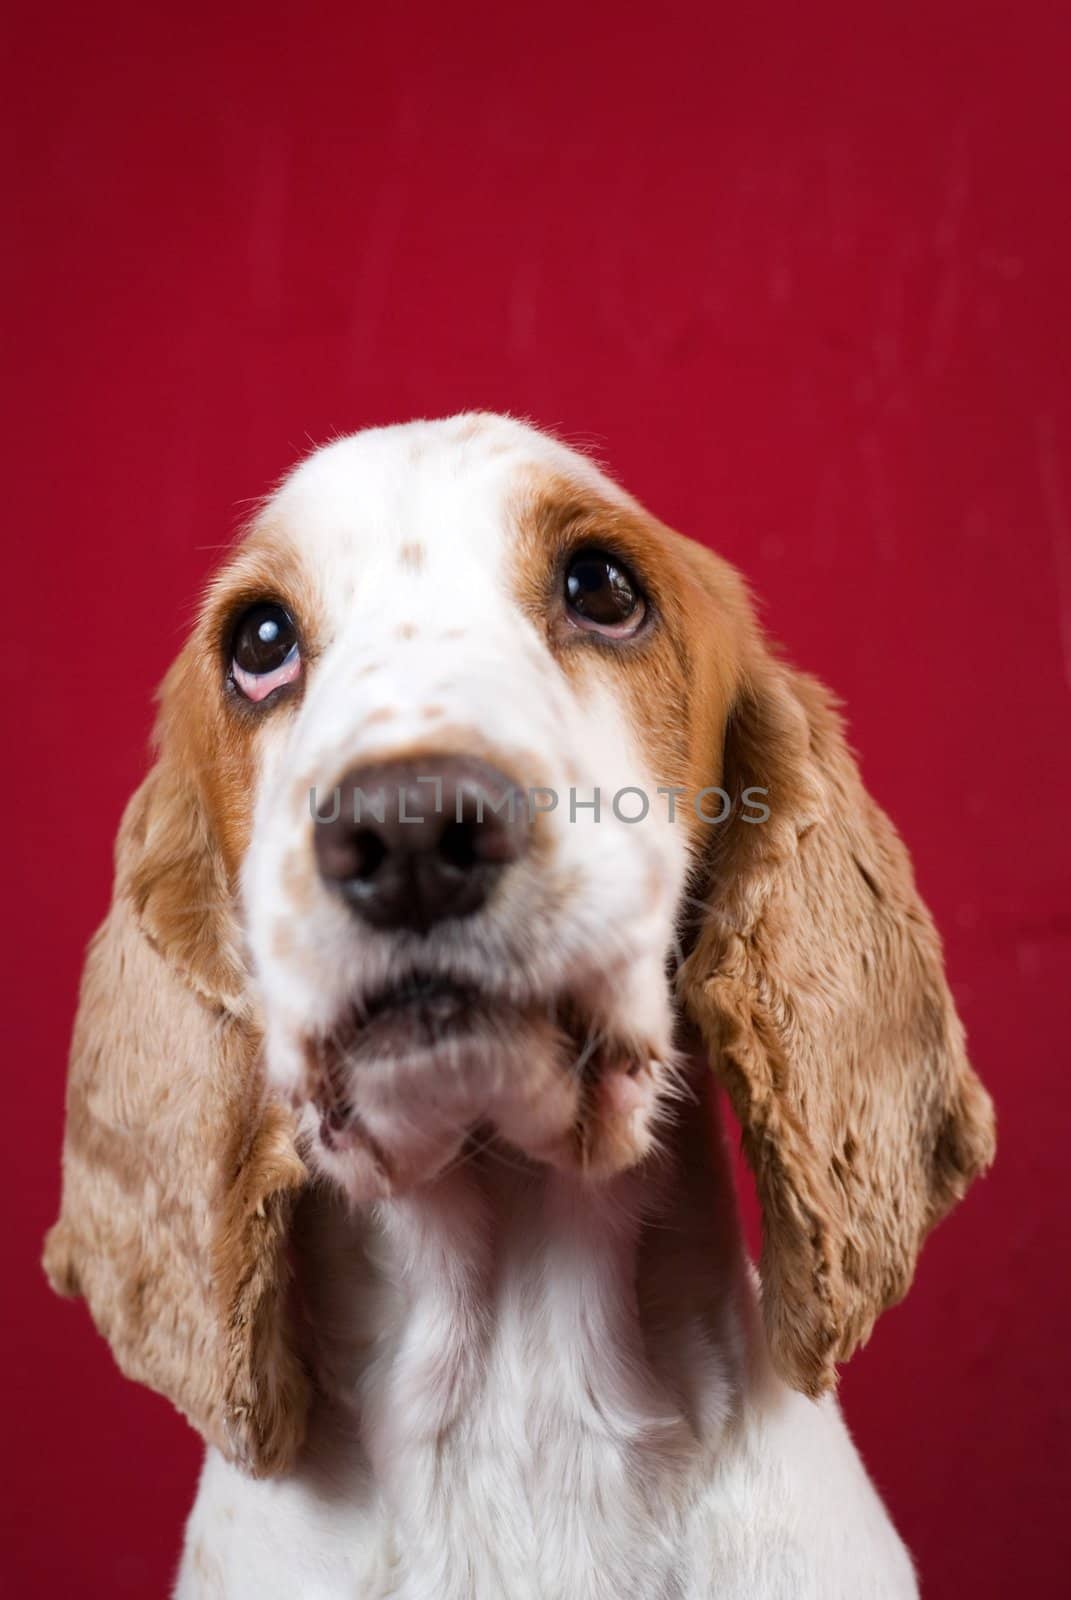 Purebred Cocker Spaniel. Red copy space over head, intentional slight vignetting, shallow depth of field - focus only on the eyes.